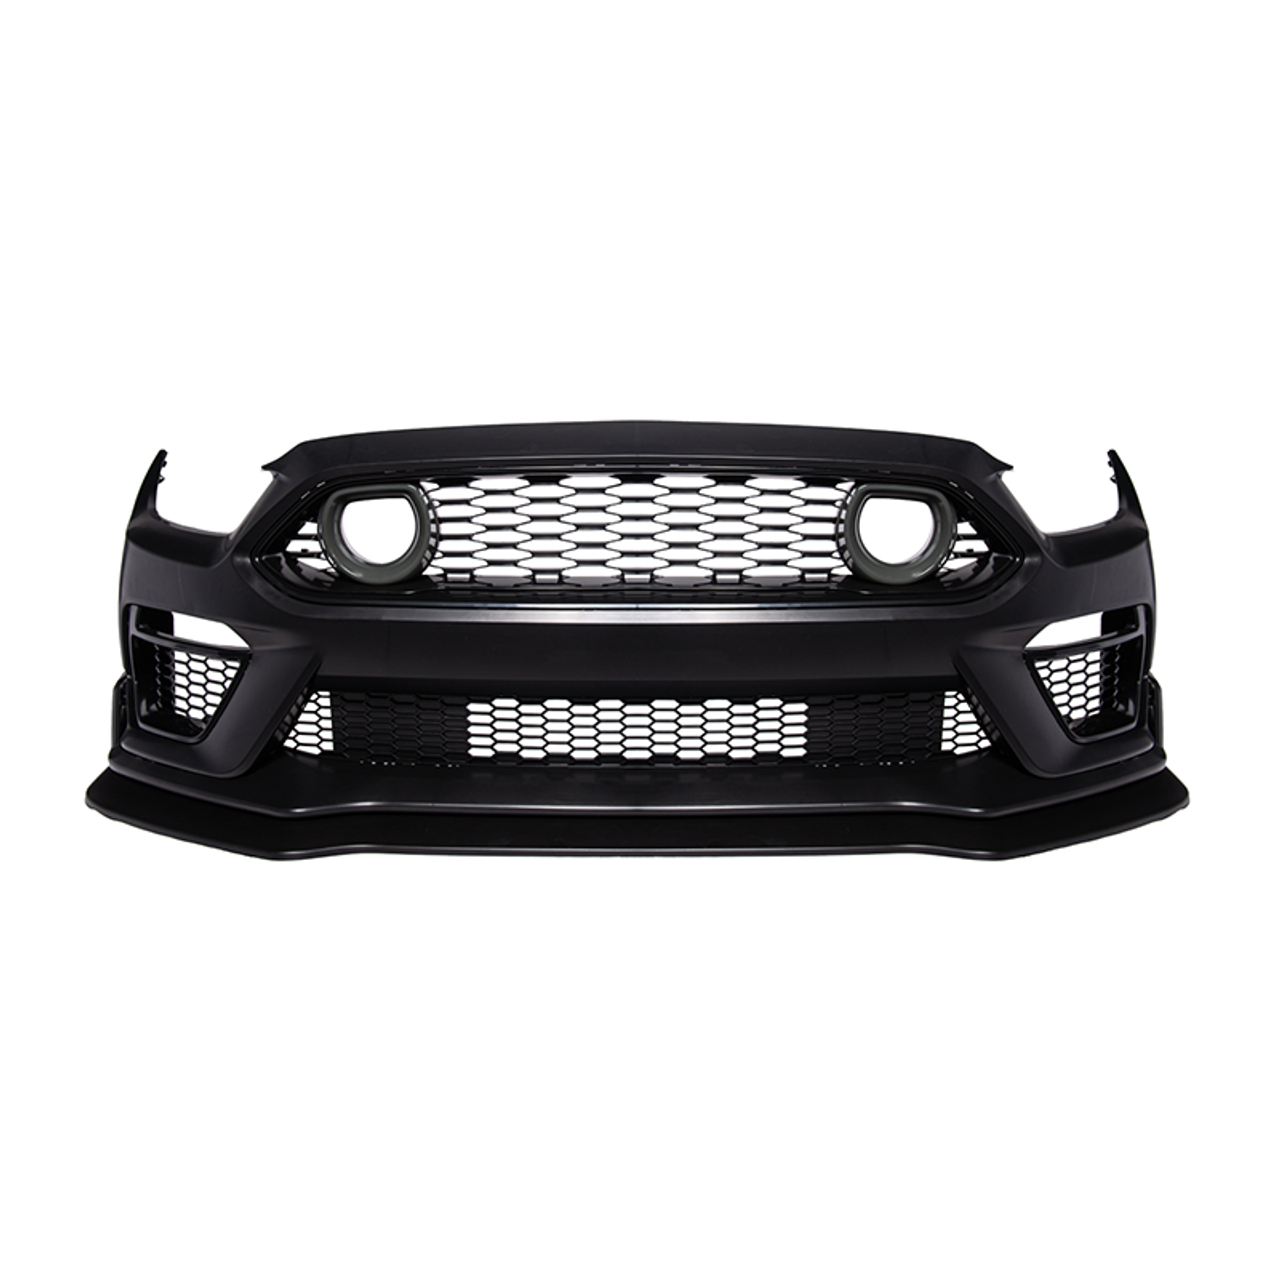 EOS Mach 1 Conversion Front Bumper Kit with LED - 15-17 Ford Mustang